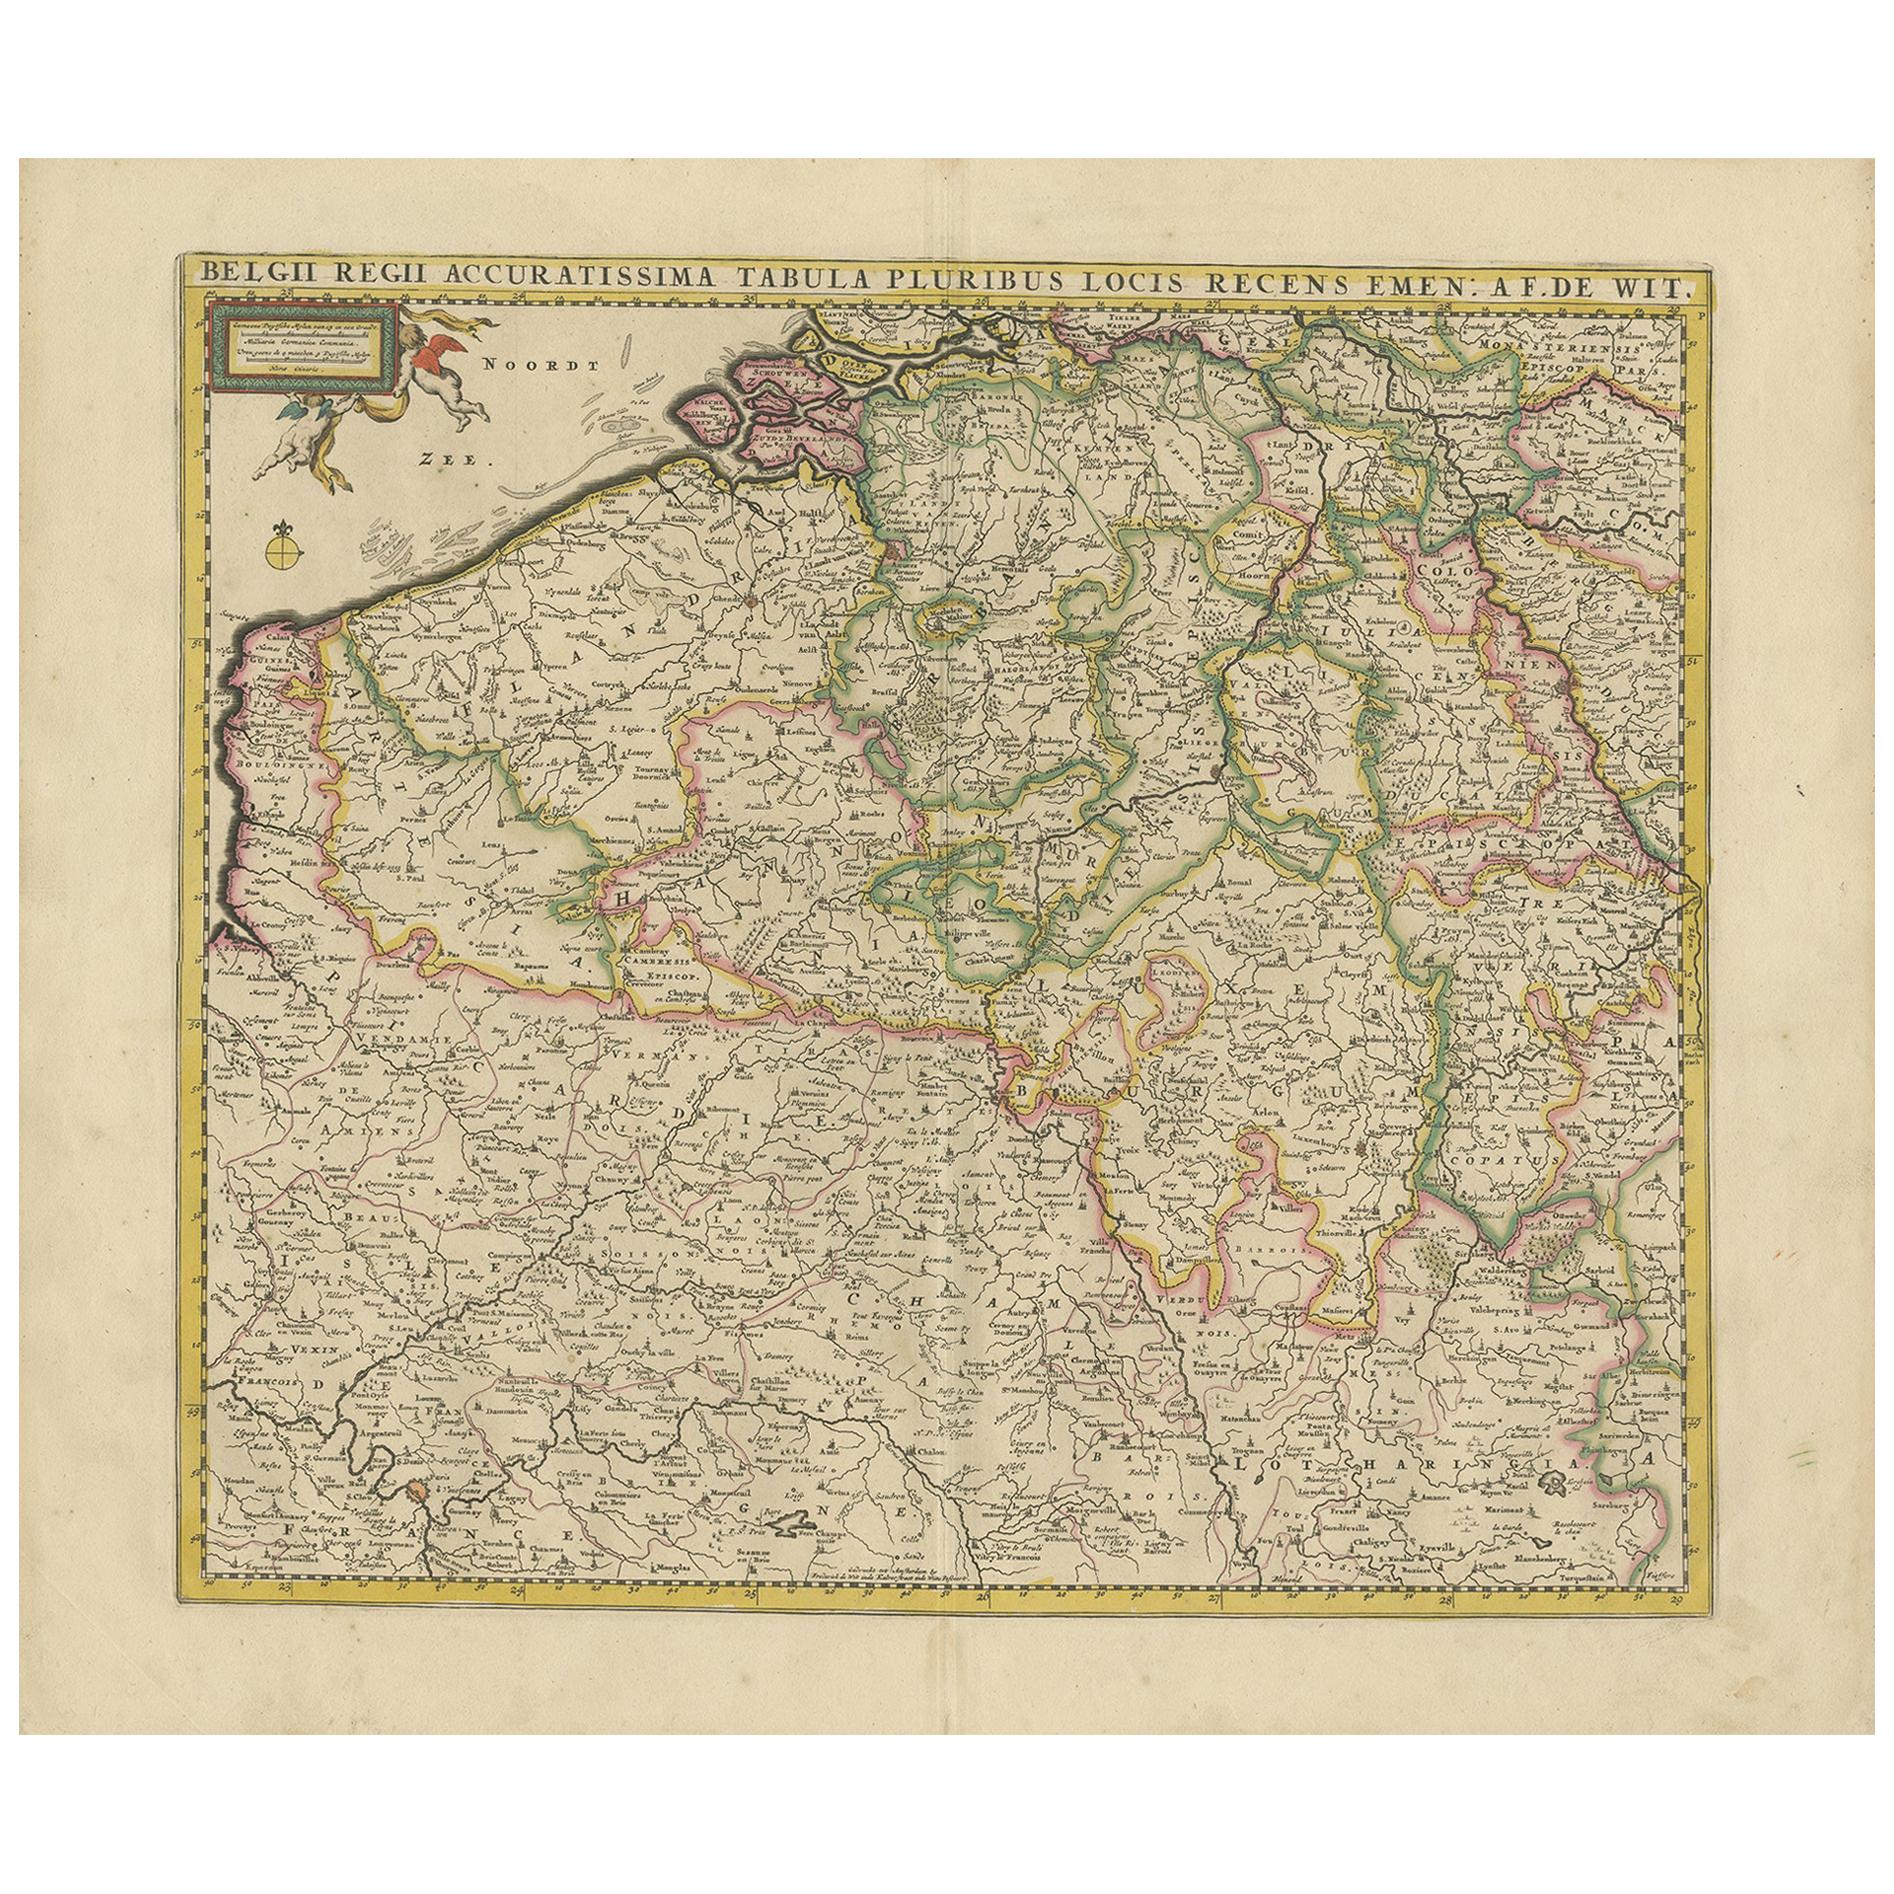 Antique Map of Belgium and Northern France by F. de Wit, circa 1680